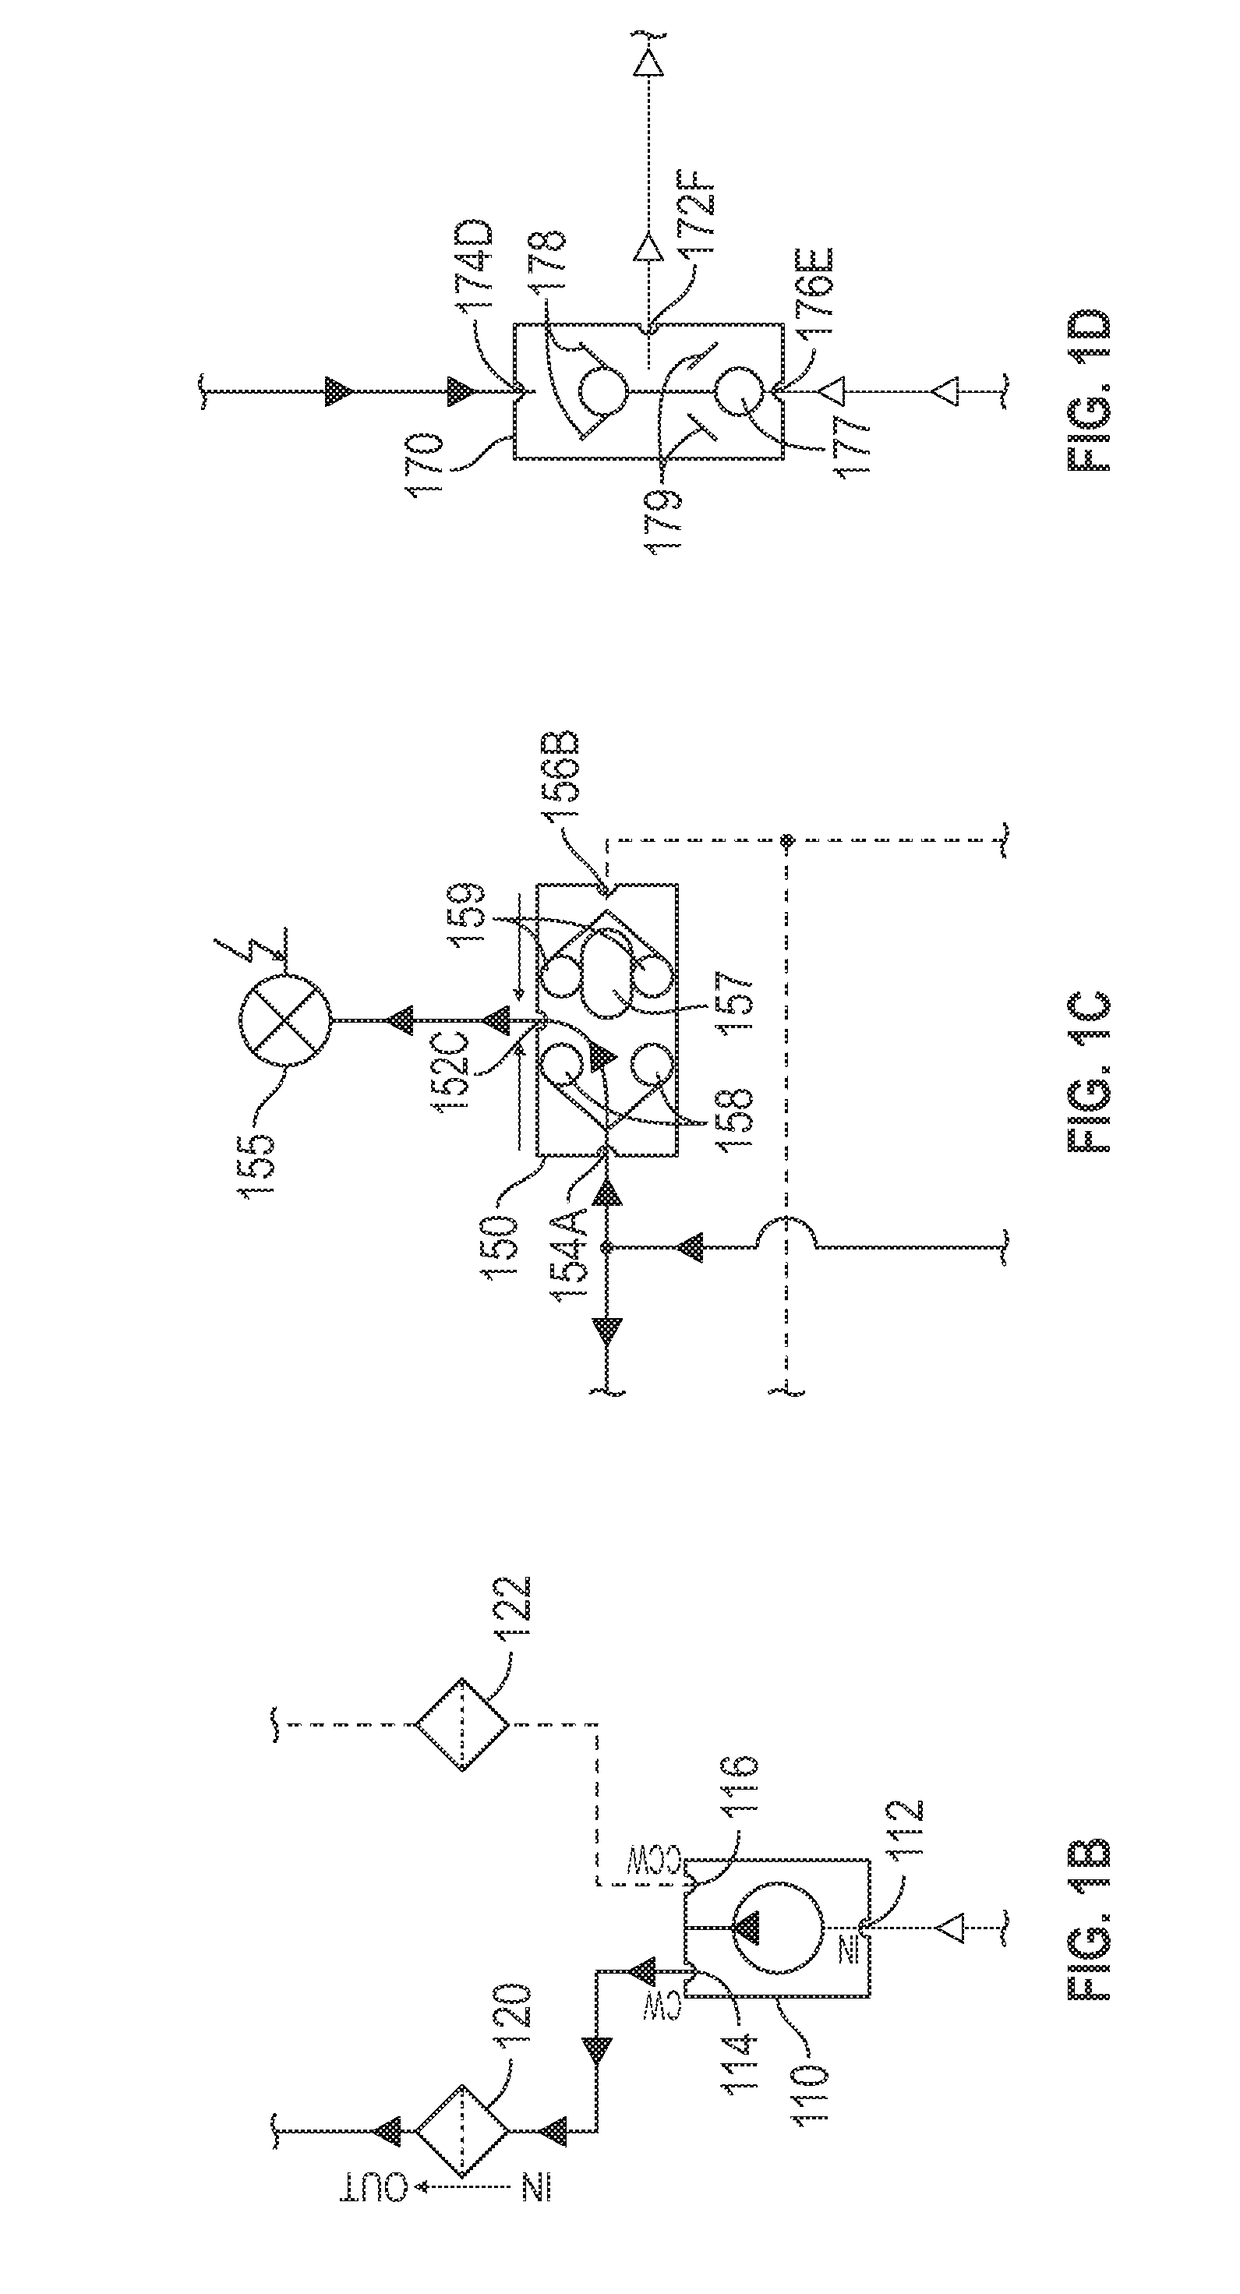 Prime Mover System and Methods Utilizing Balanced Flow within Bi-Directional Power Units